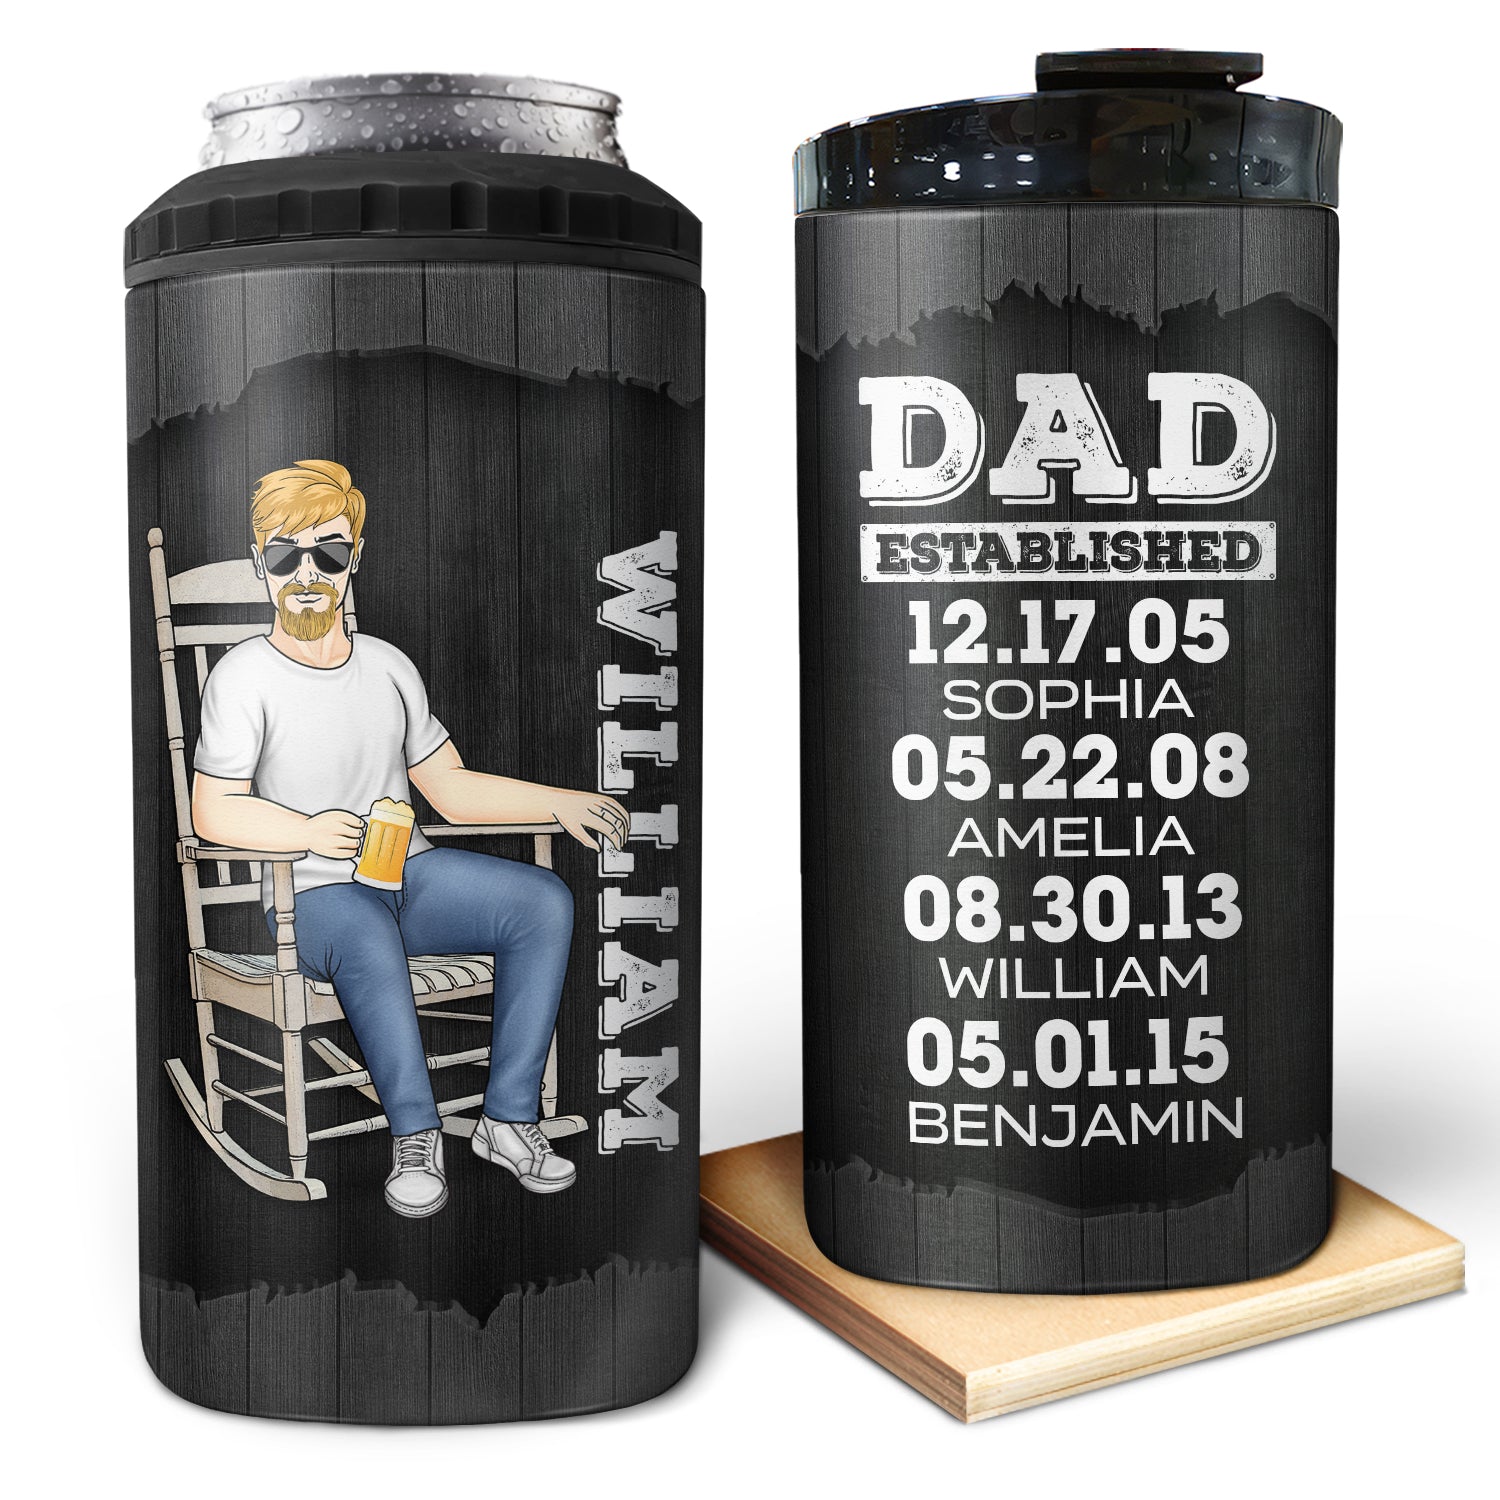 Dad Established - Birthday Gift For Father, Grandpa Family - Personalized Custom 4 In 1 Can Cooler Tumbler